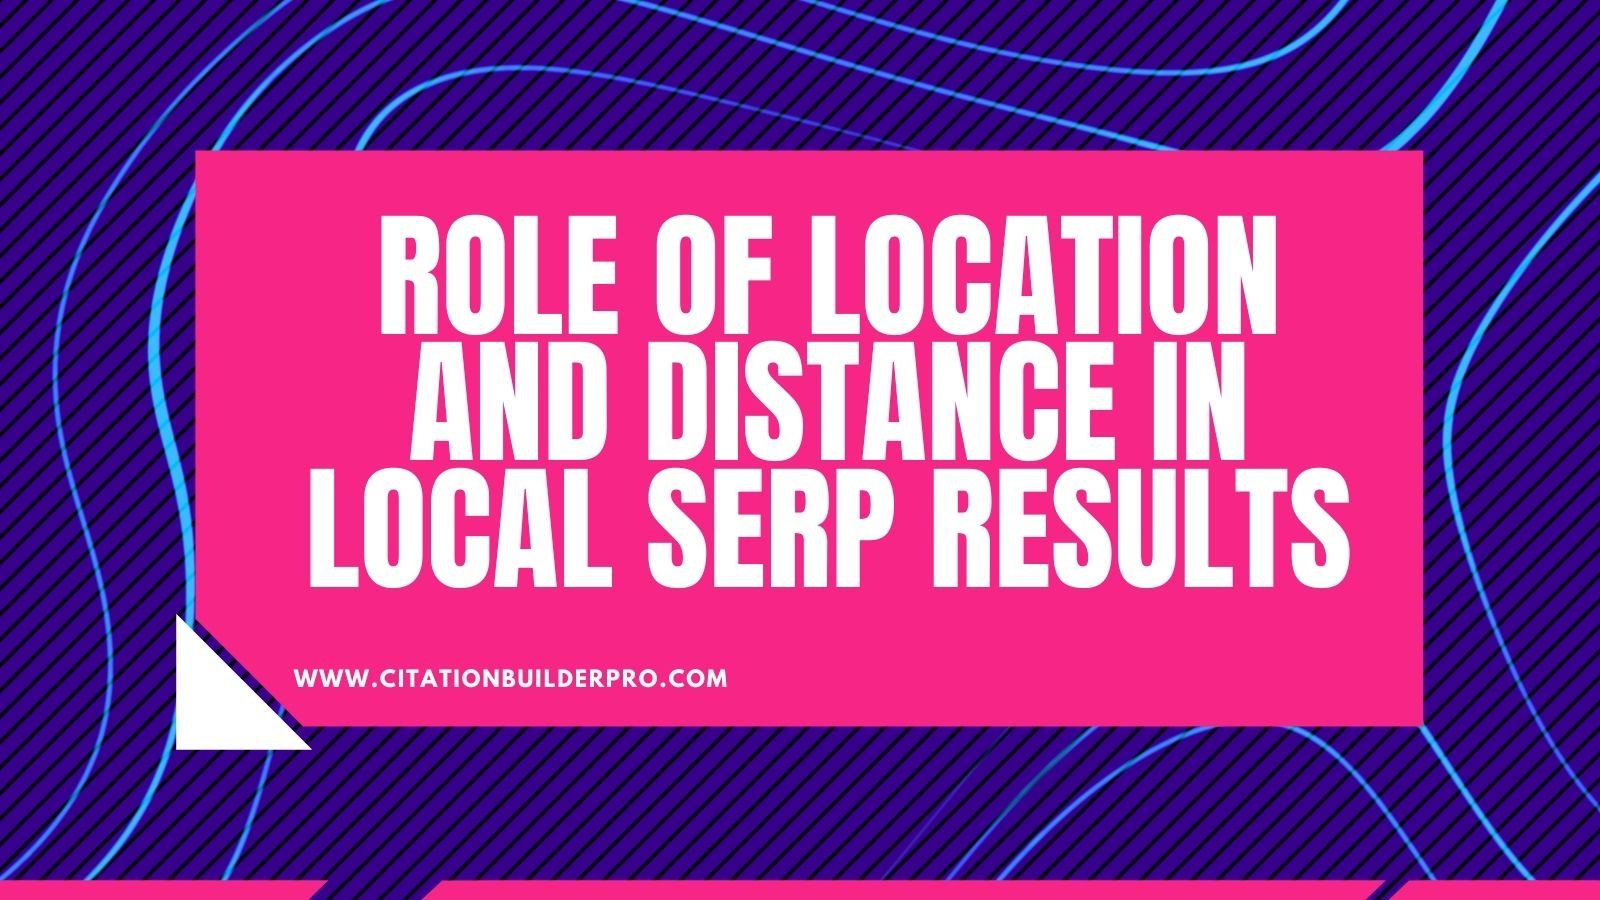 Role-of-Location-and-distance-in-local-serp-results